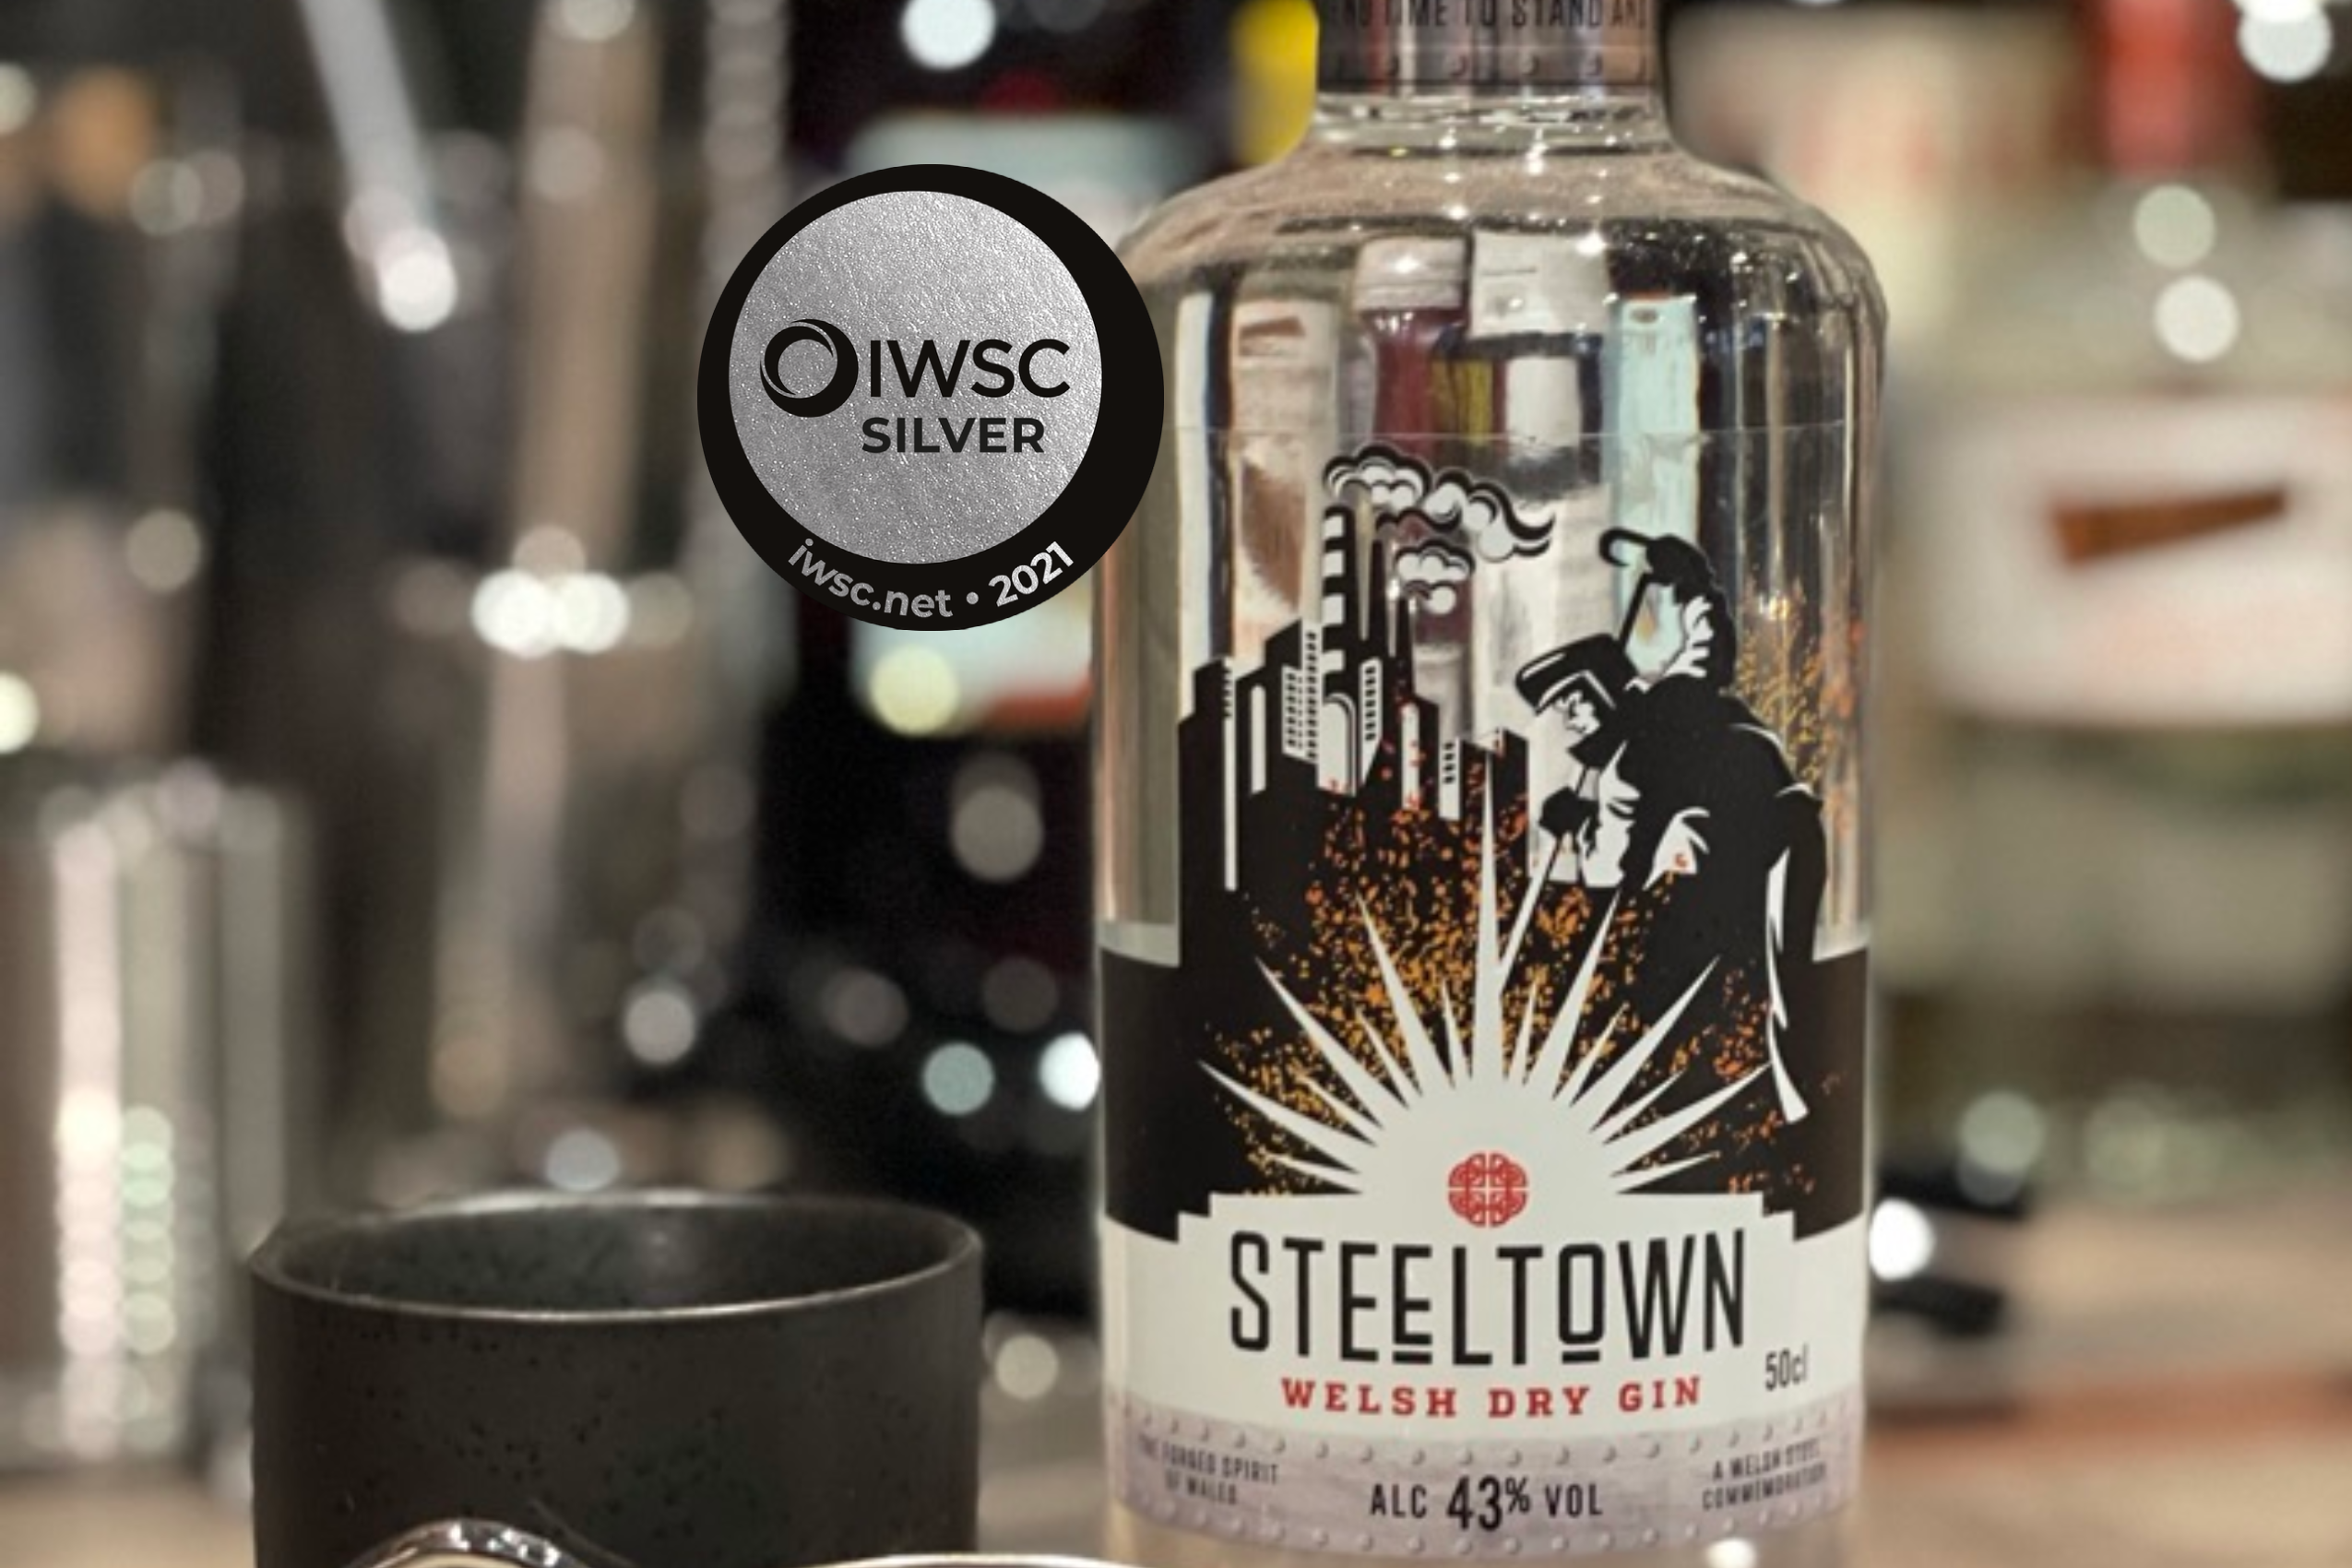 Steeltown Welsh Dry Gin Takes Silver at the IWSC